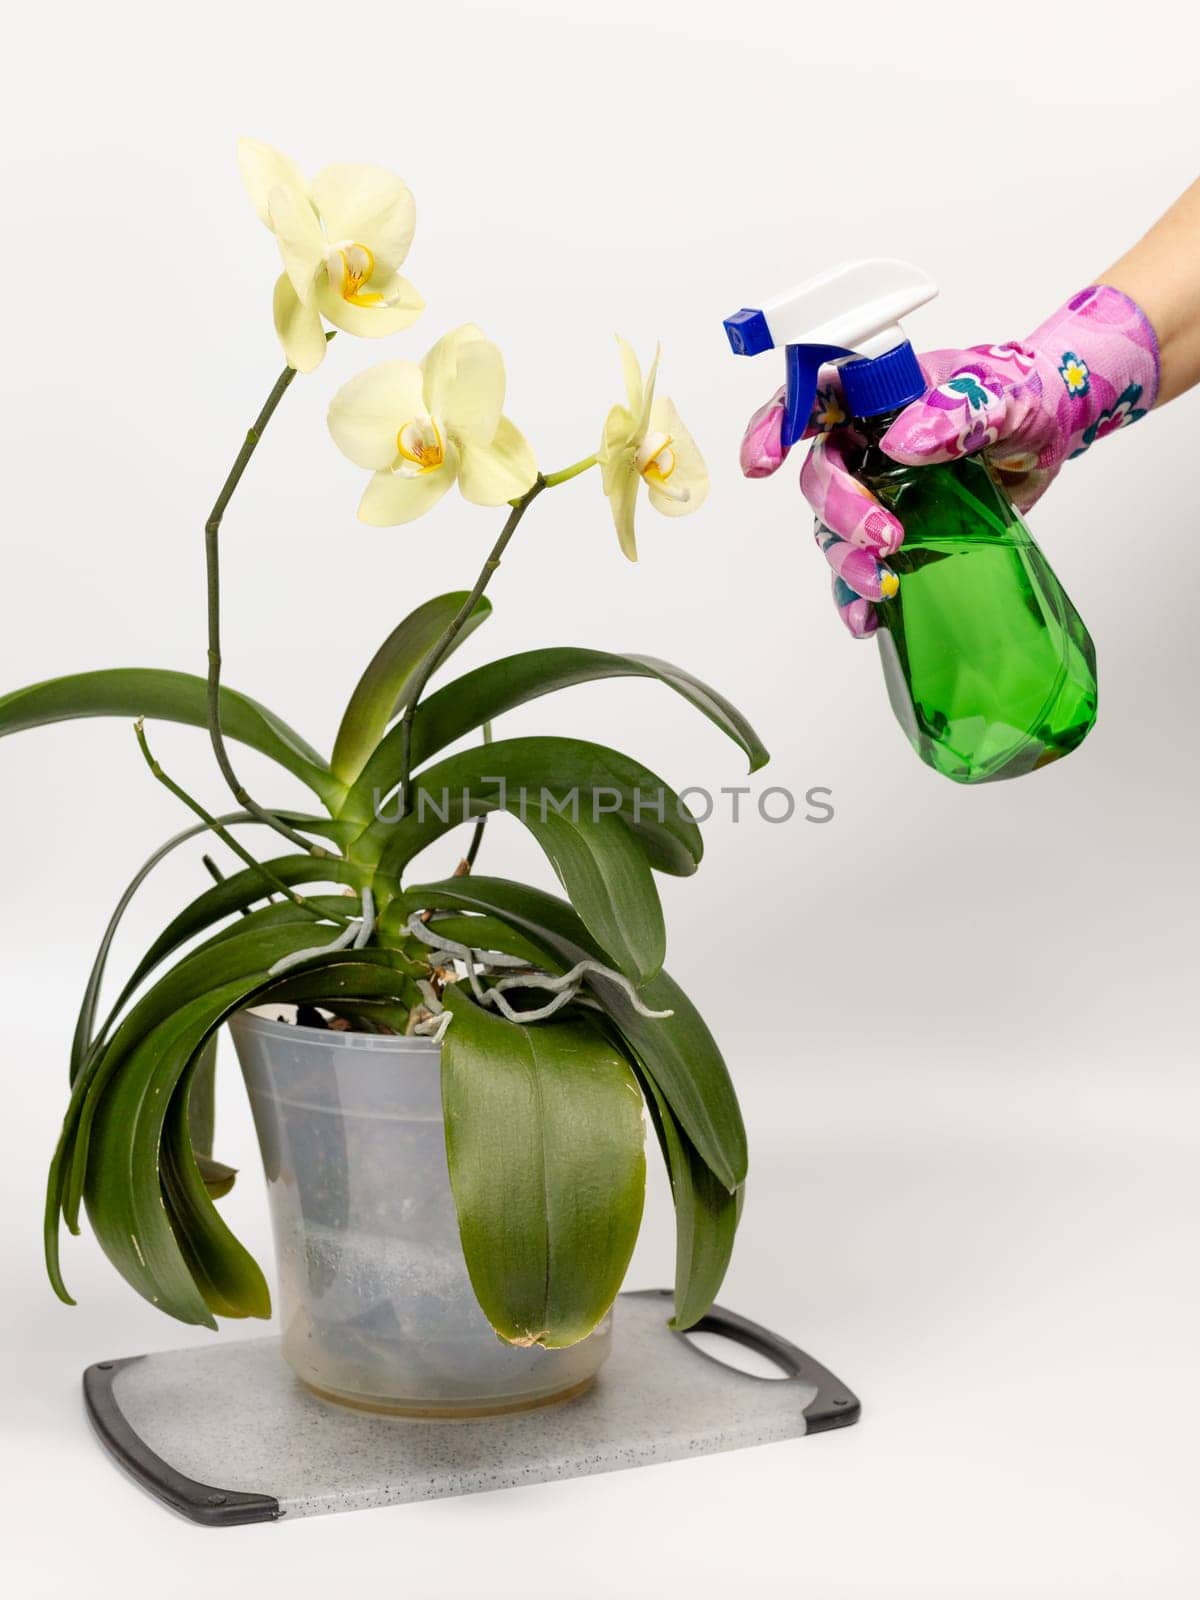 Woman sprays orchids in flower pot. Taking care for house plants. by mvg6894